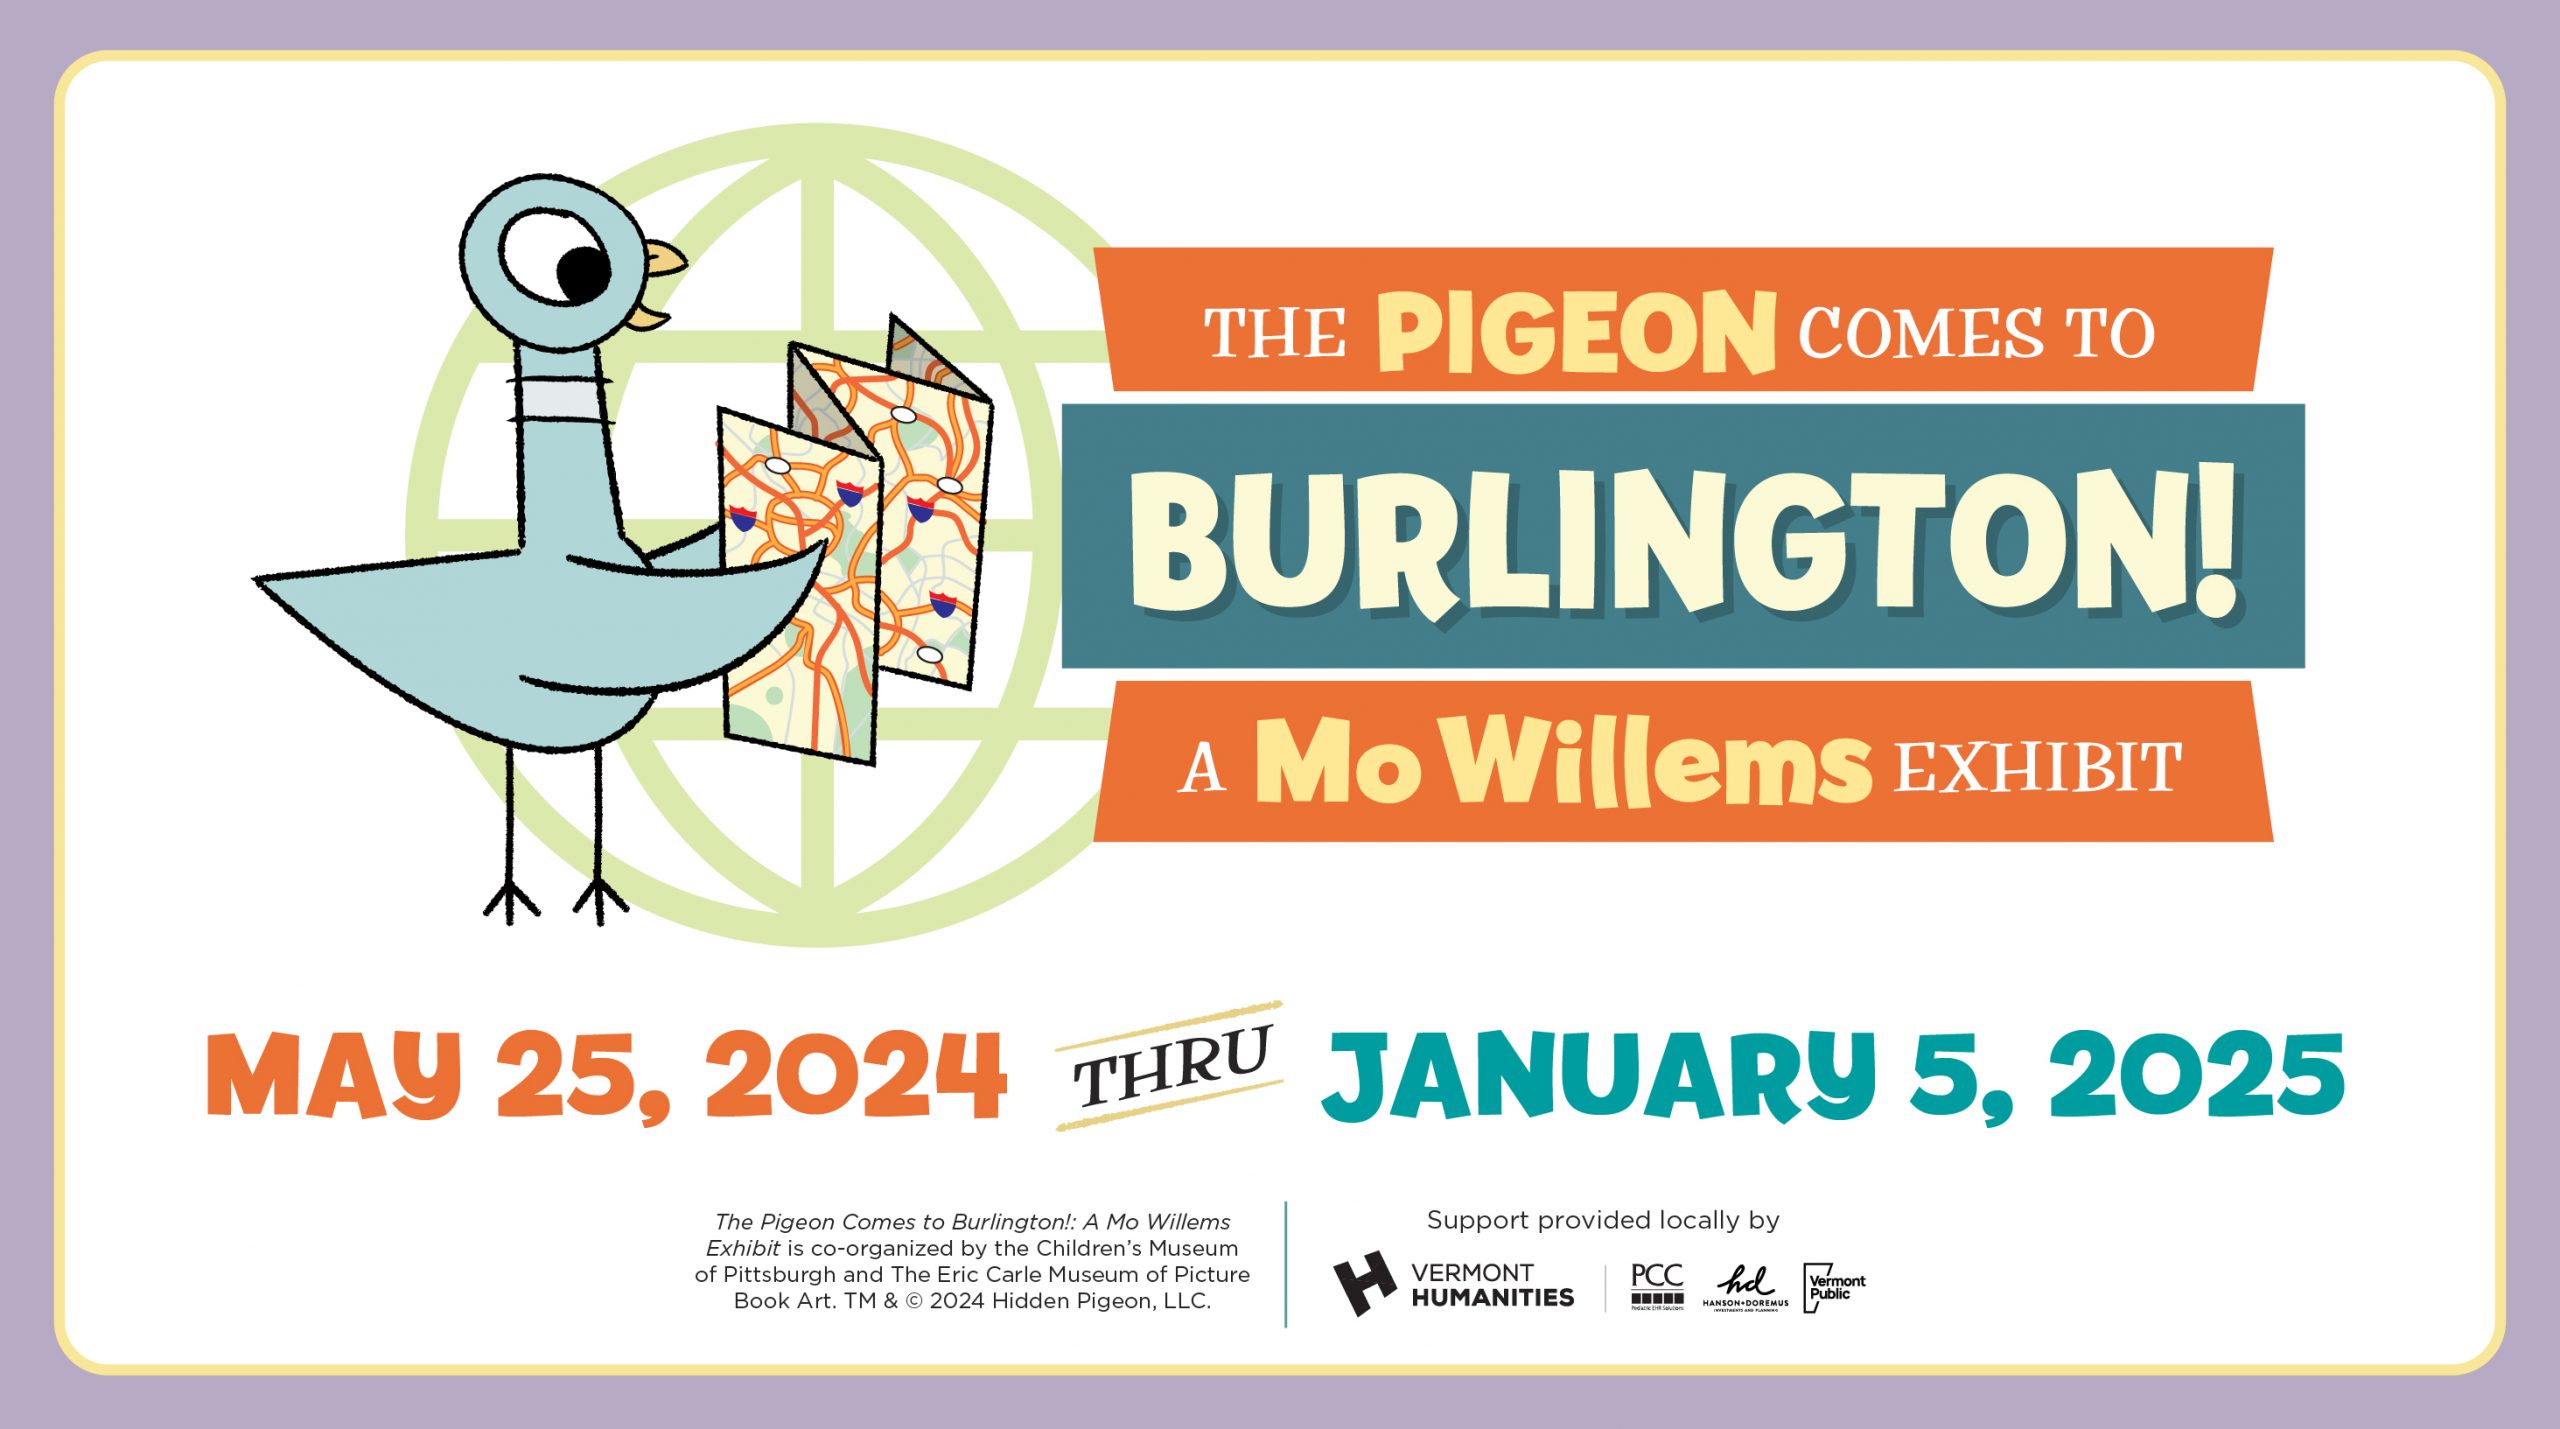 Graphic with image of Mo Willems Pigeon Character and logo that reads "The Pigeon Comes to Burlington! A Mo Willems Exhibit. May 25 2024 - January 5 2024. Sponsor credit line."